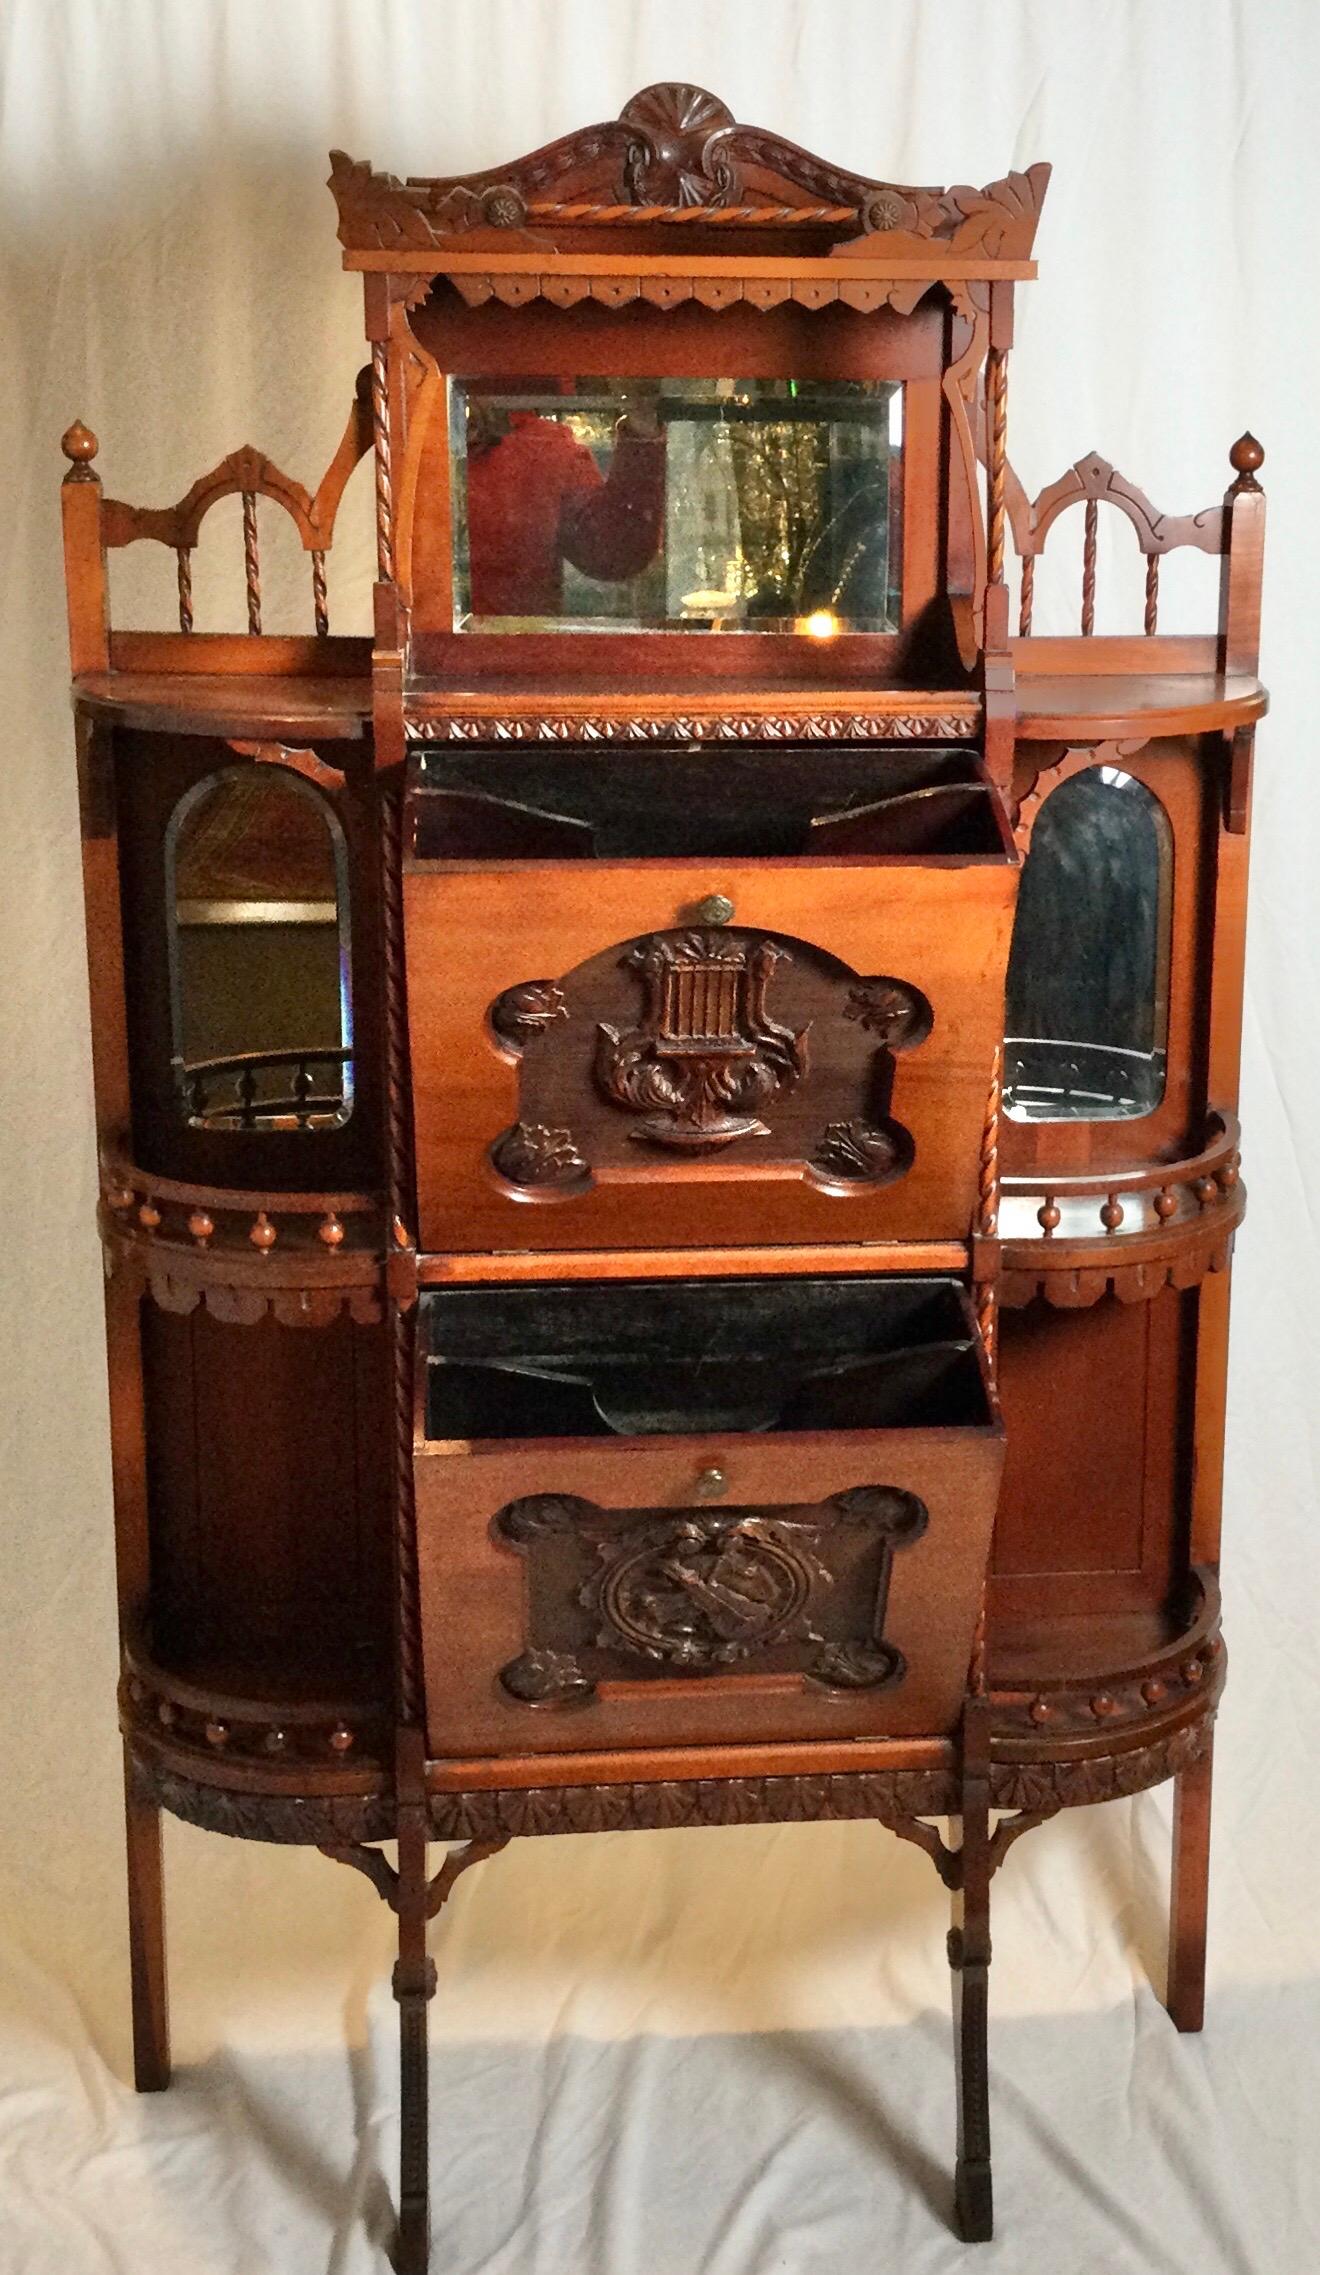 Hand-Carved Rare Tall 19th Century Cherry Music Cabinet Etagere